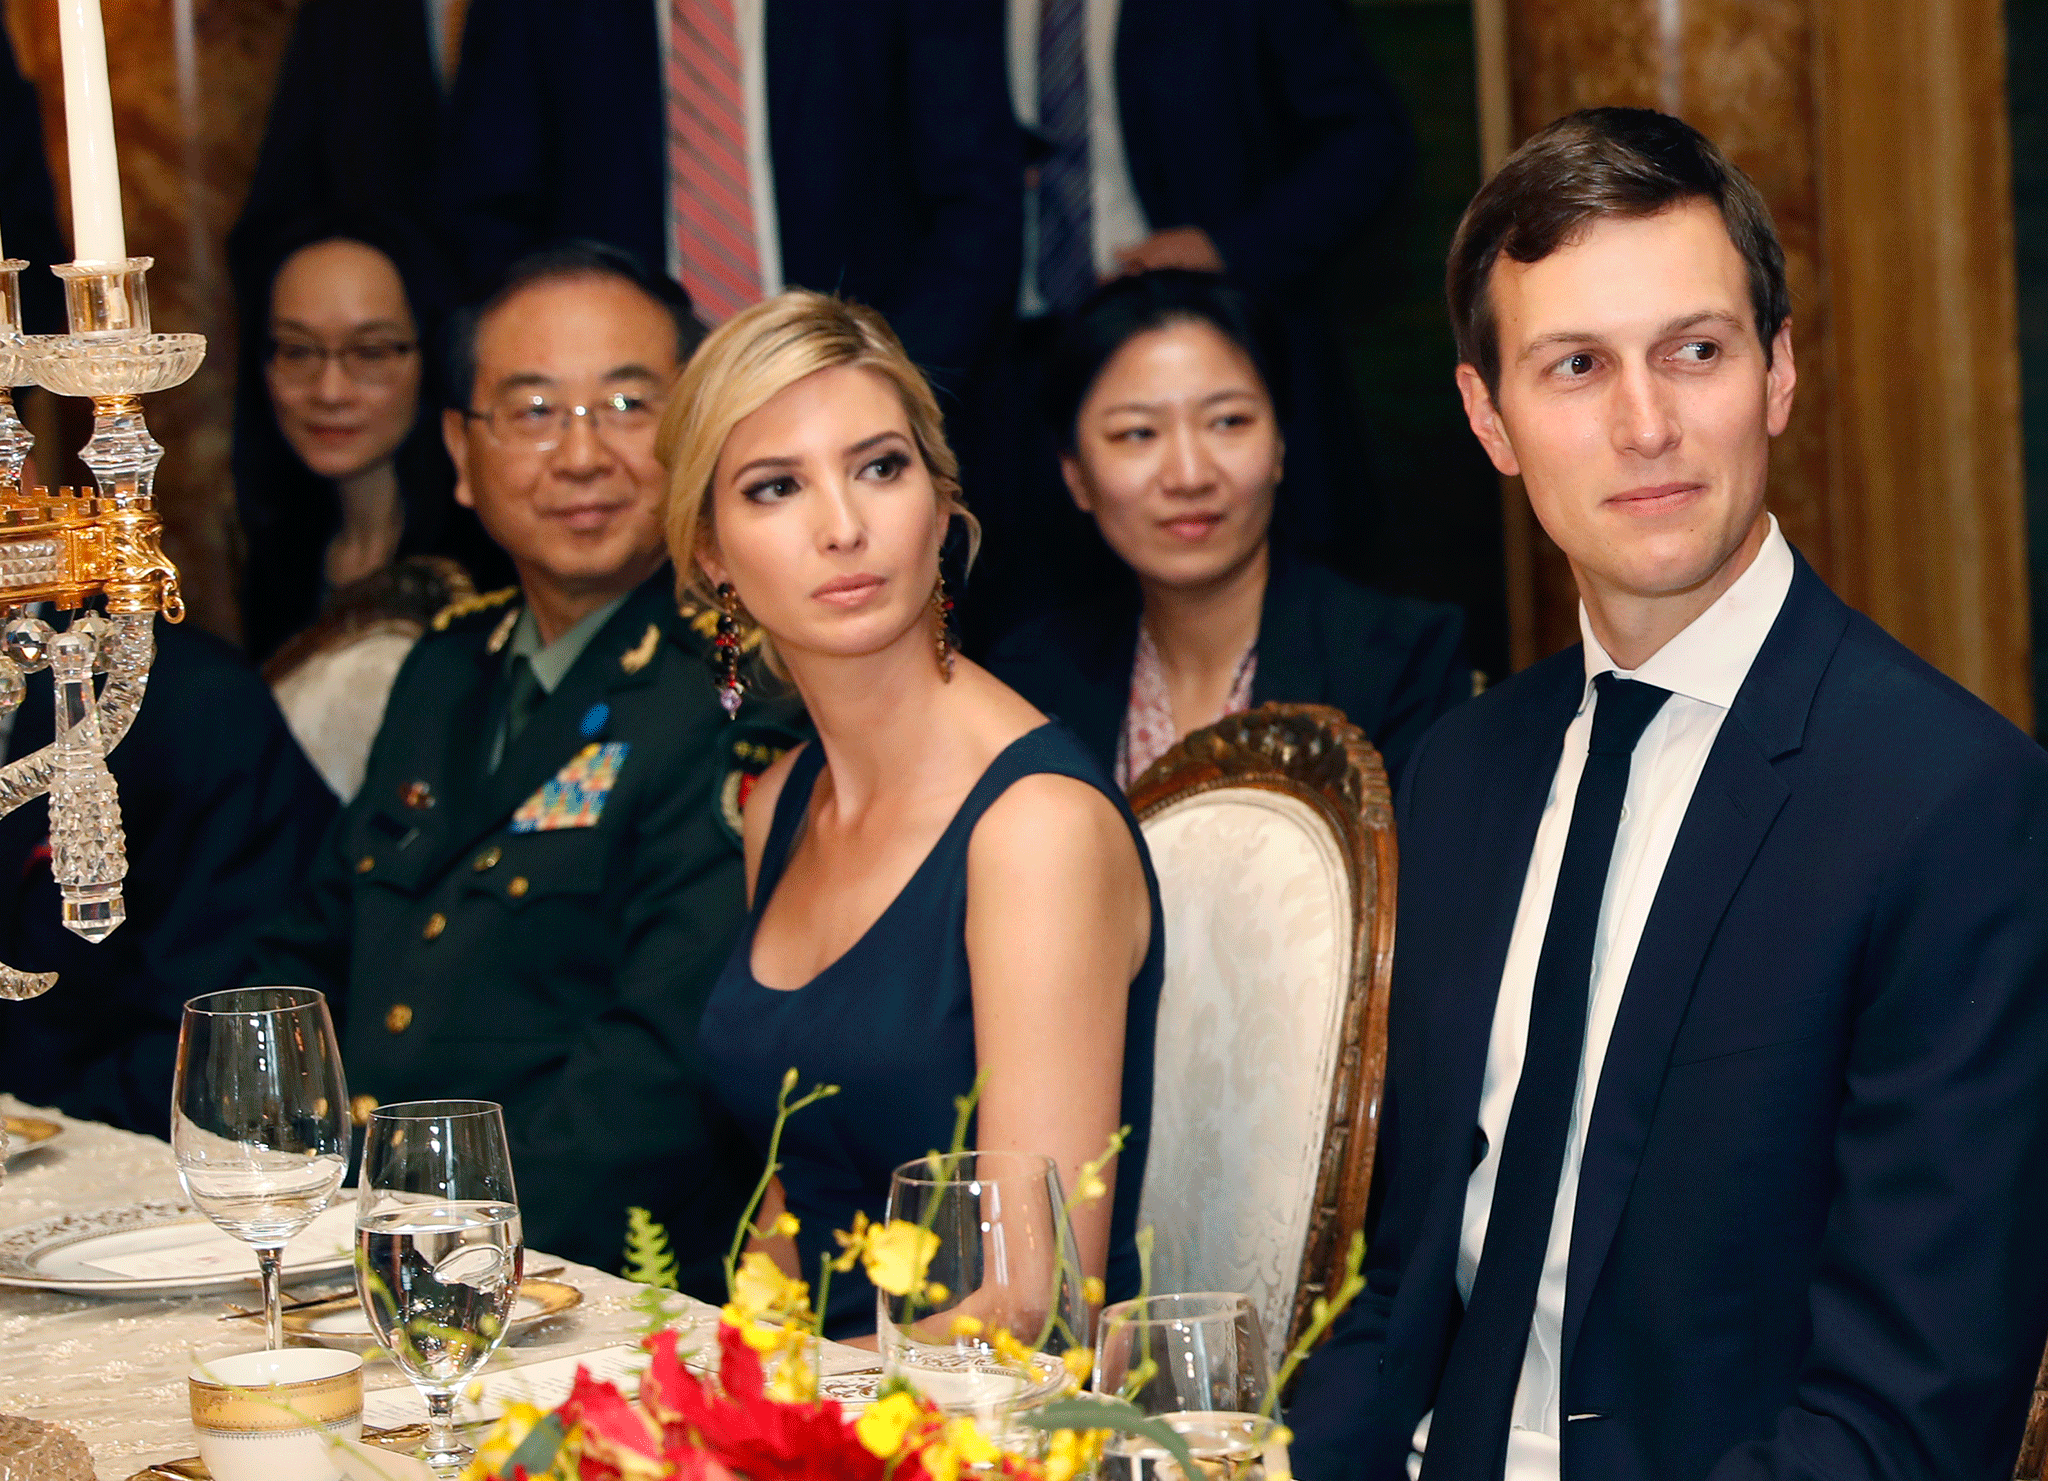 Ivanka Trump is seated with her husband White House senior adviser Jared Kushner, right, during a dinner with President Donald Trump and top Chinese government officials, at Mar-a-Lago, 6 April, 2017